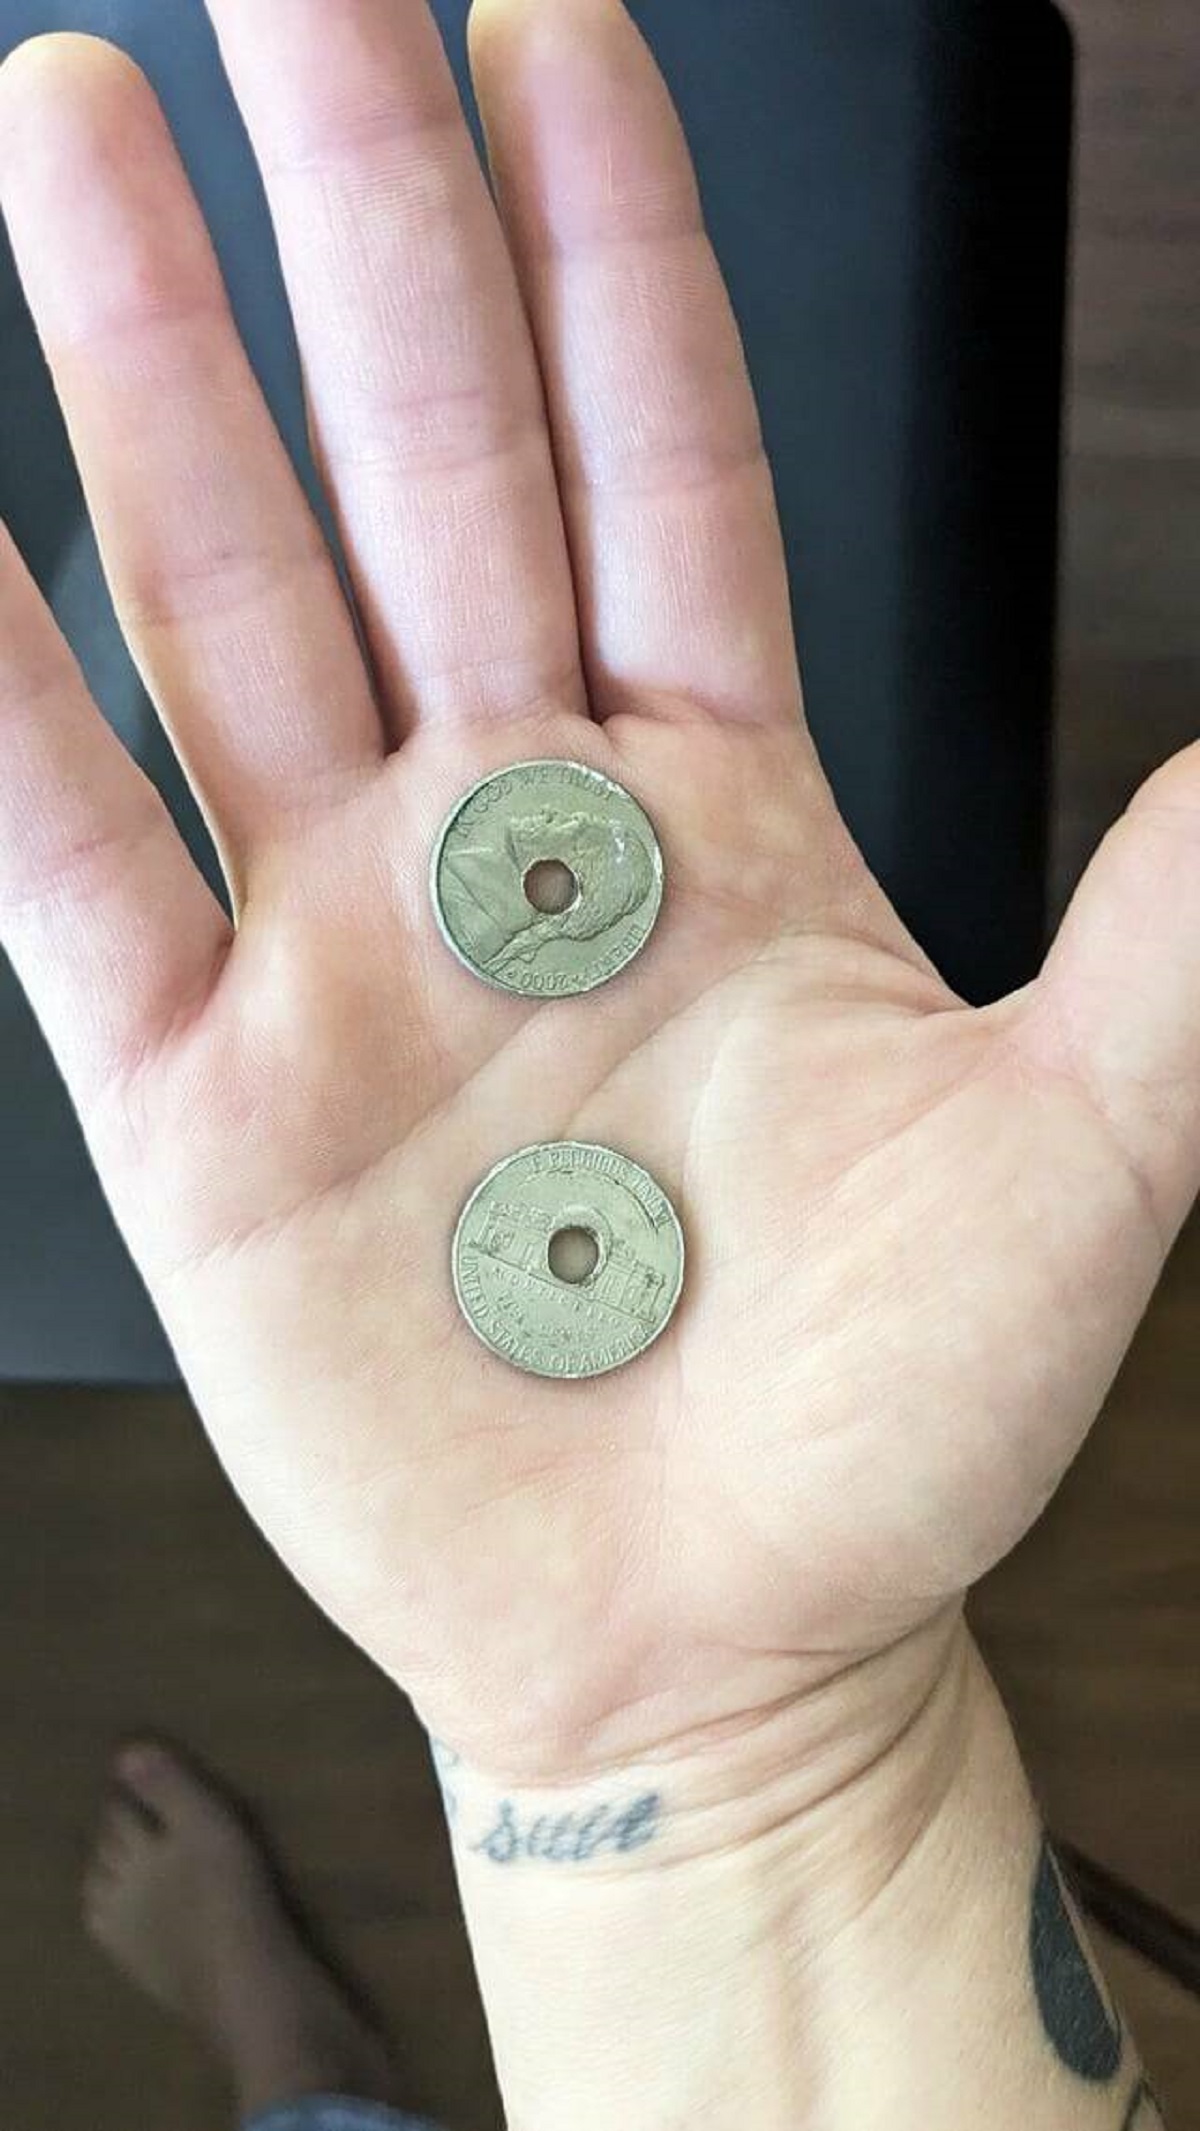 "My landlord used nickels instead of washers for my cabinet knobs"